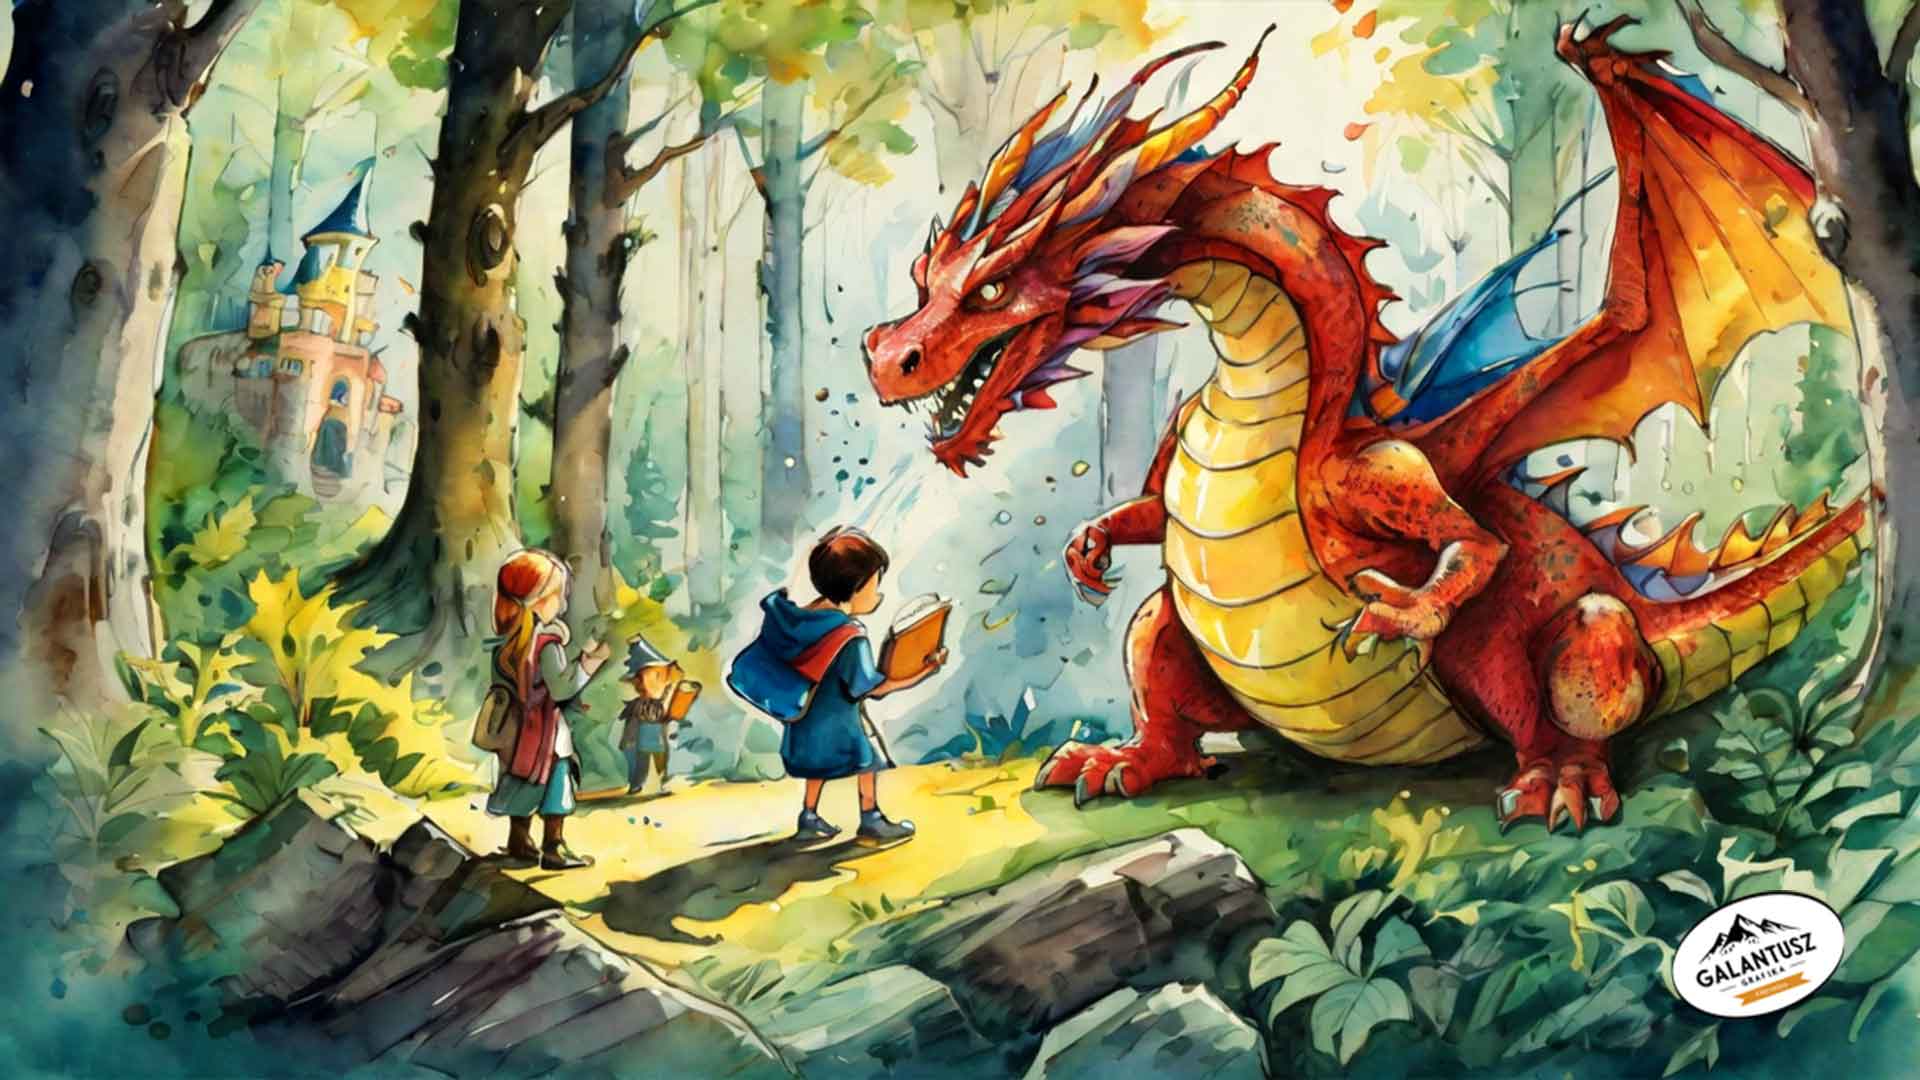 Storybook Illustration as a Means of Connection